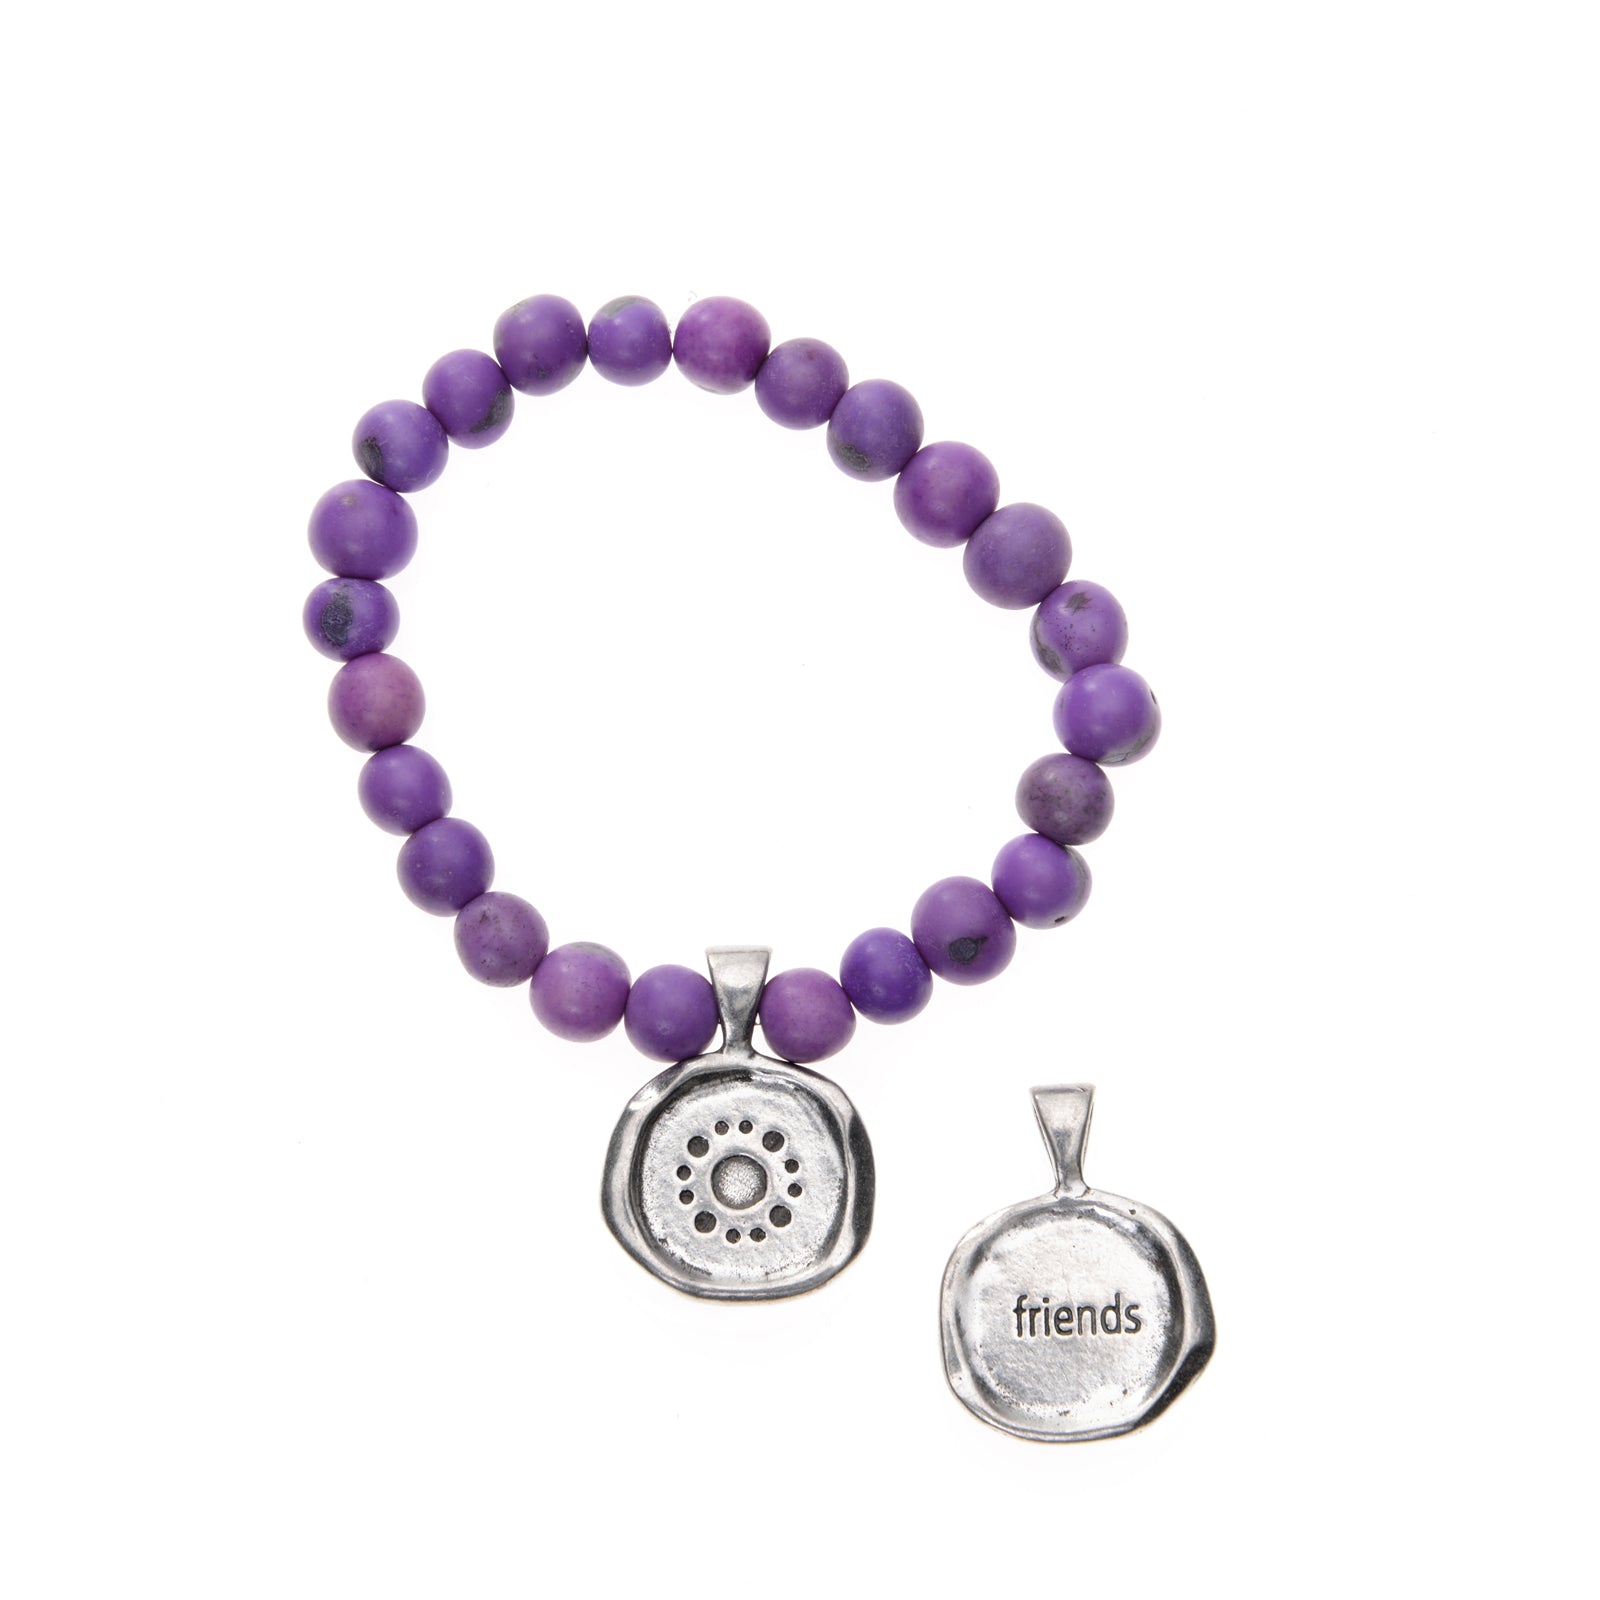 Purple Acai Seeds of Life Bracelet with Wax Seal - Whitney Howard Designs